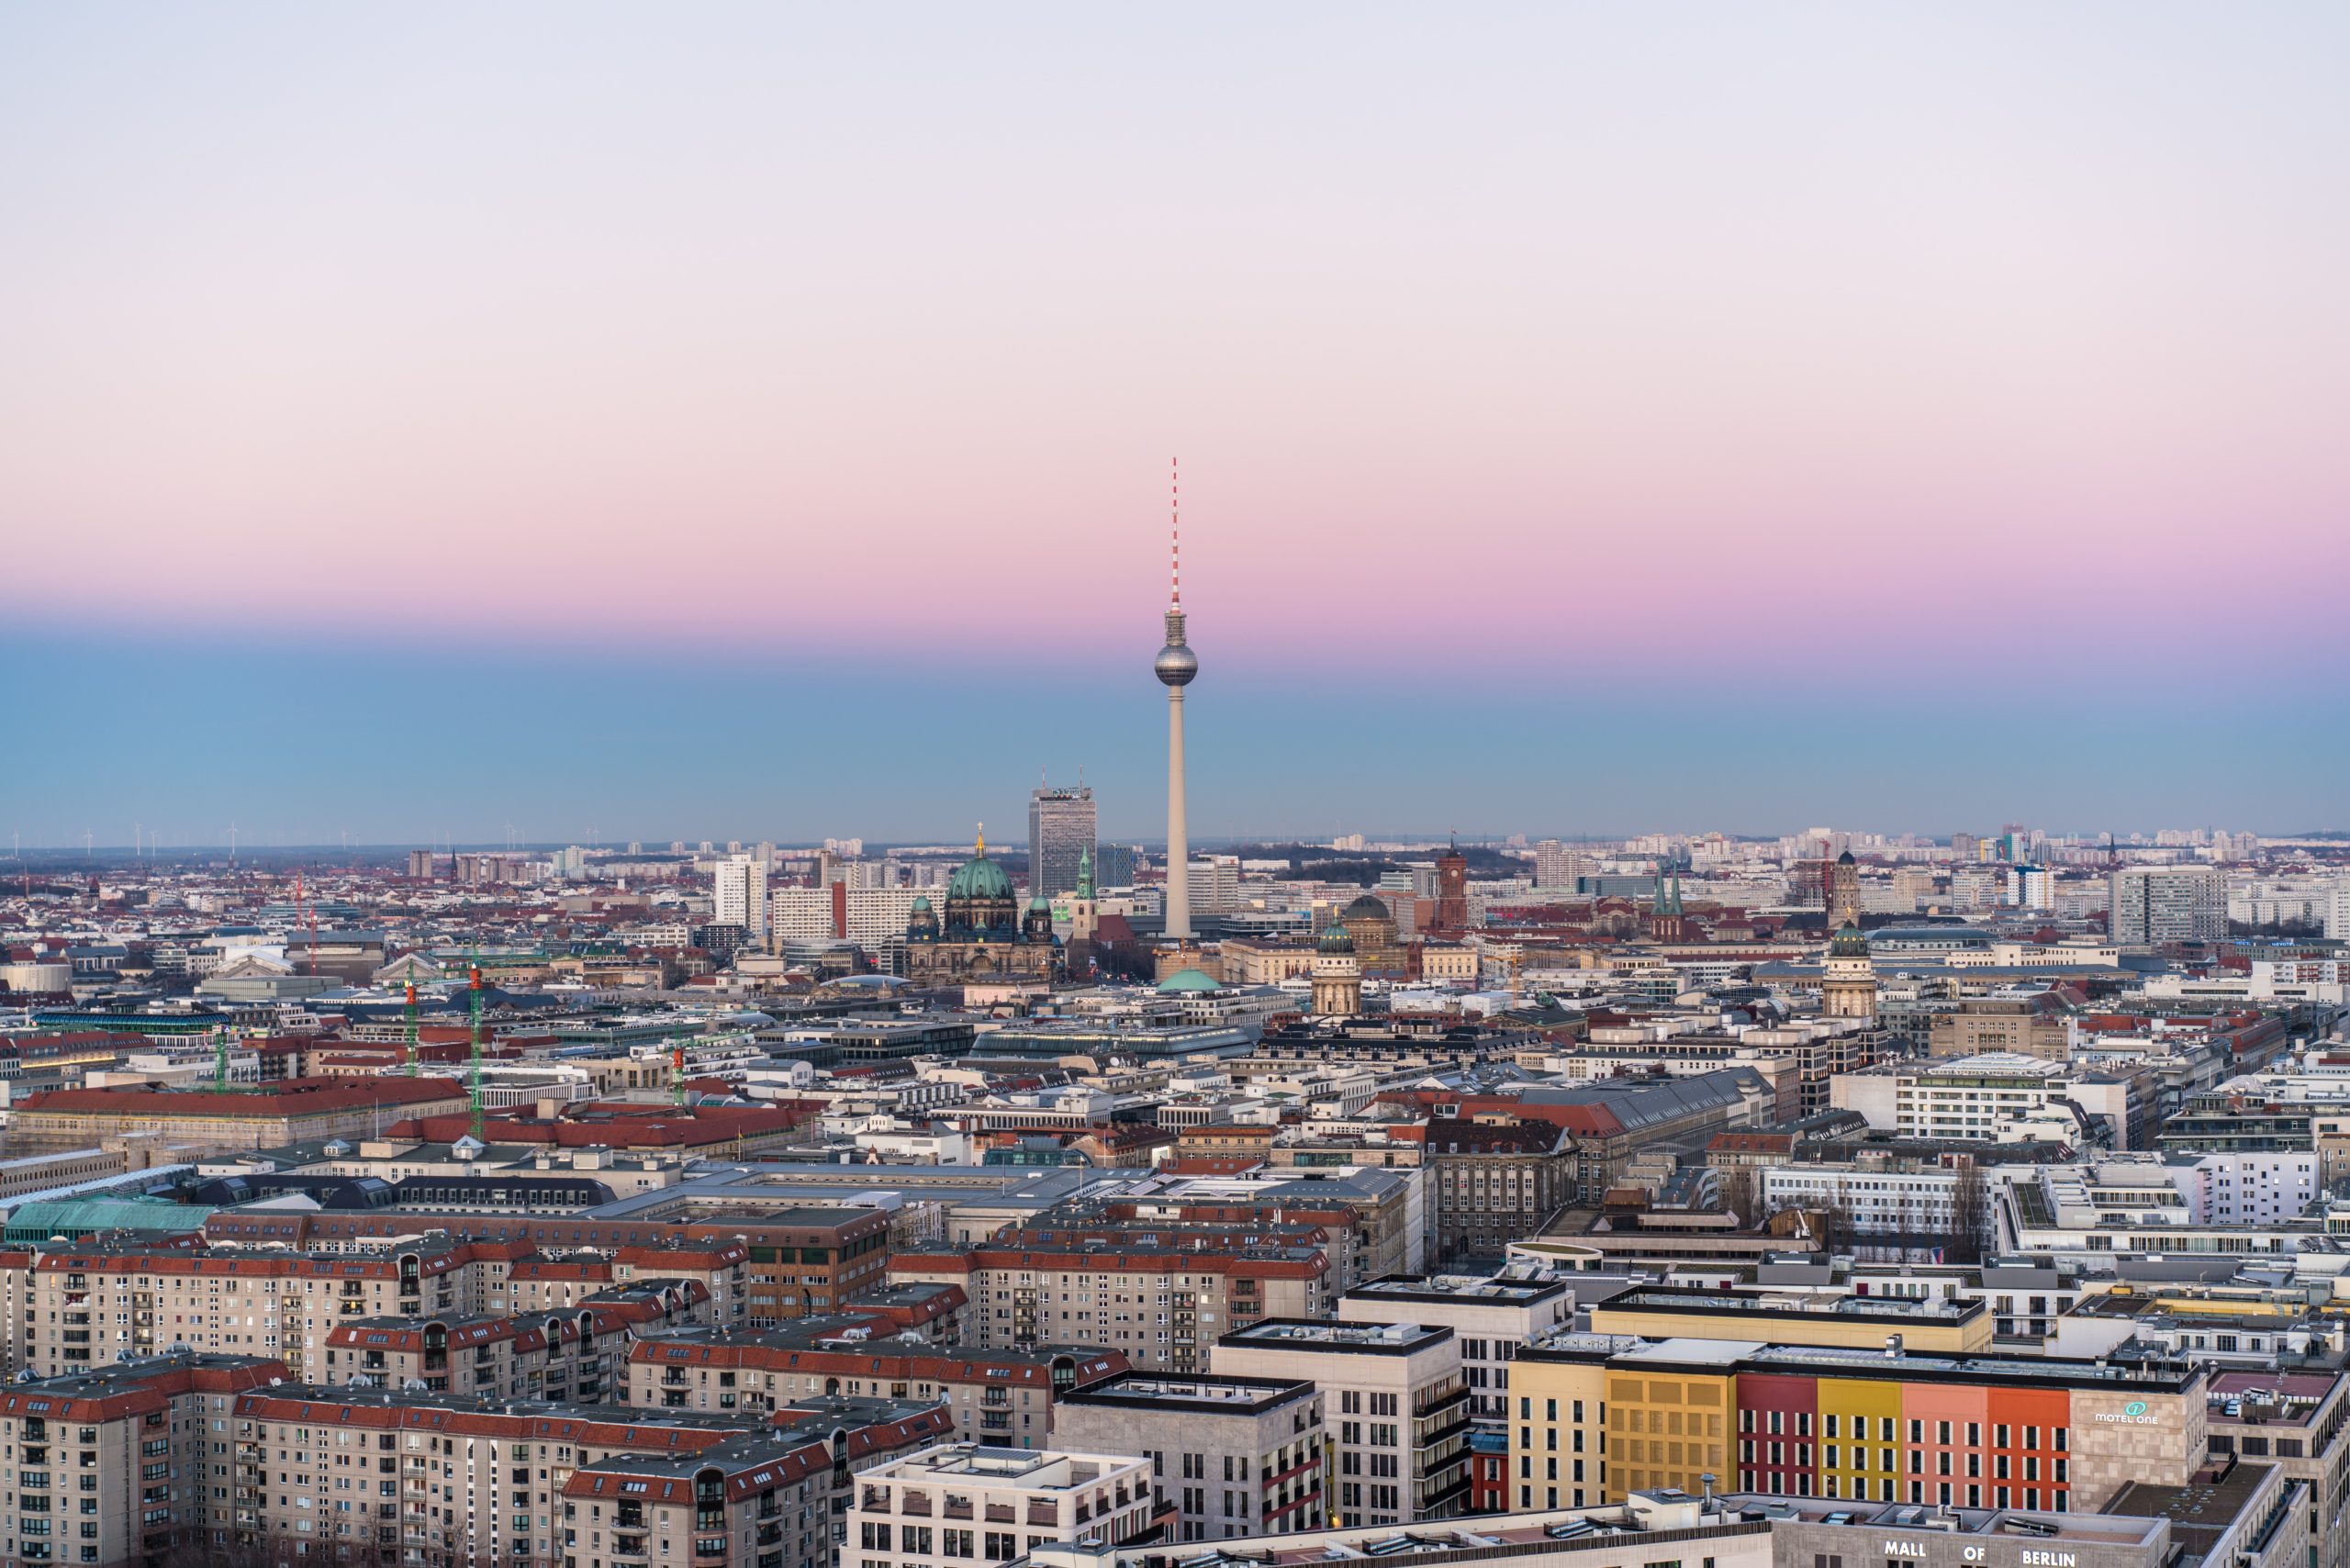 Berlin-based SaaS Proptech Receives Further Investment From German Family Office